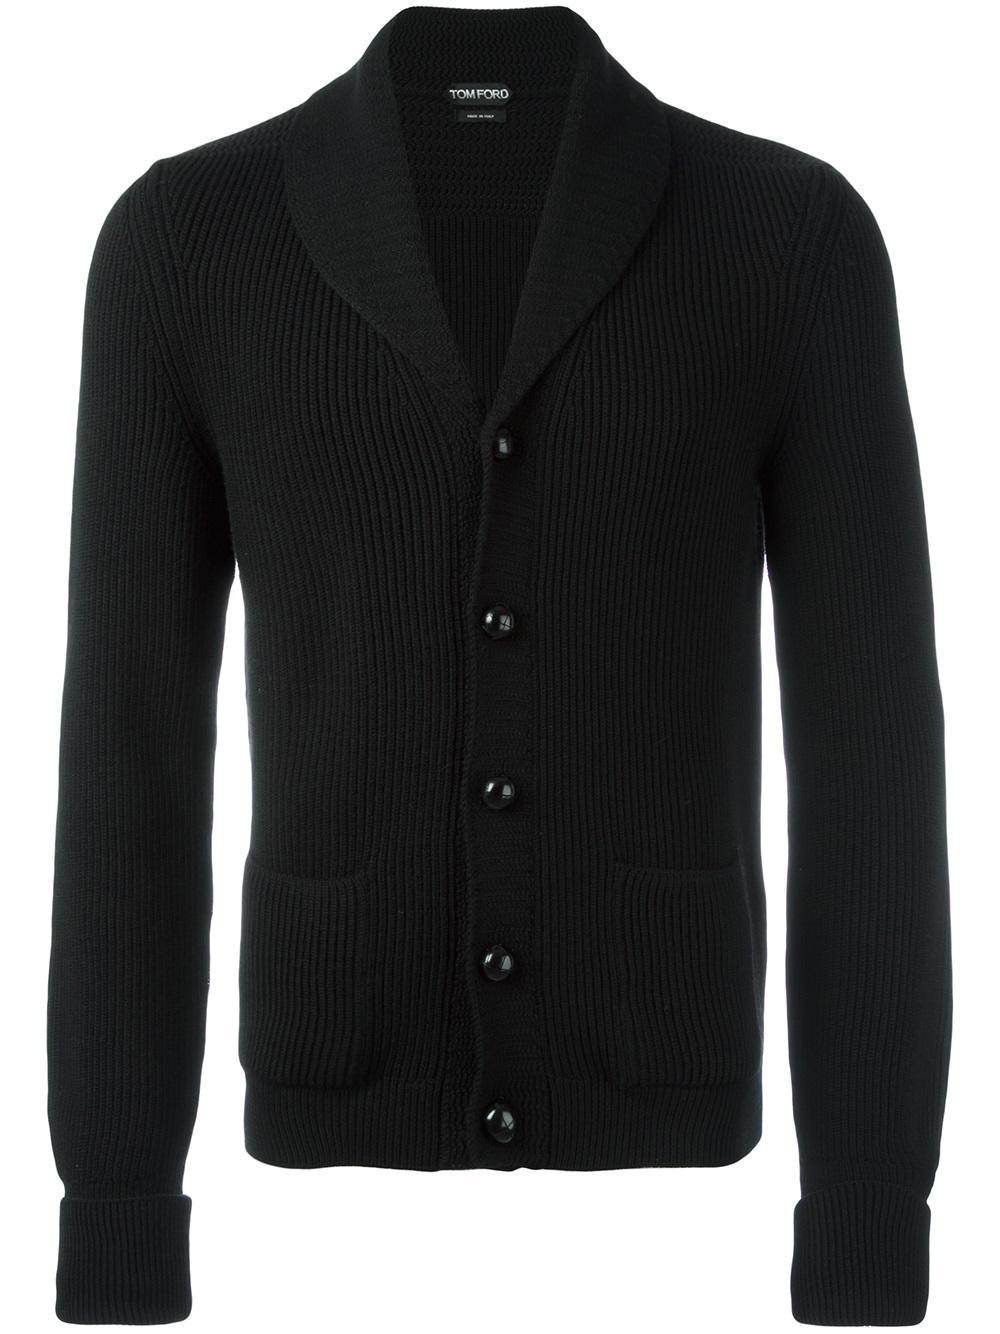 Lyst - Tom Ford Ribbed Cardigan in Black for Men